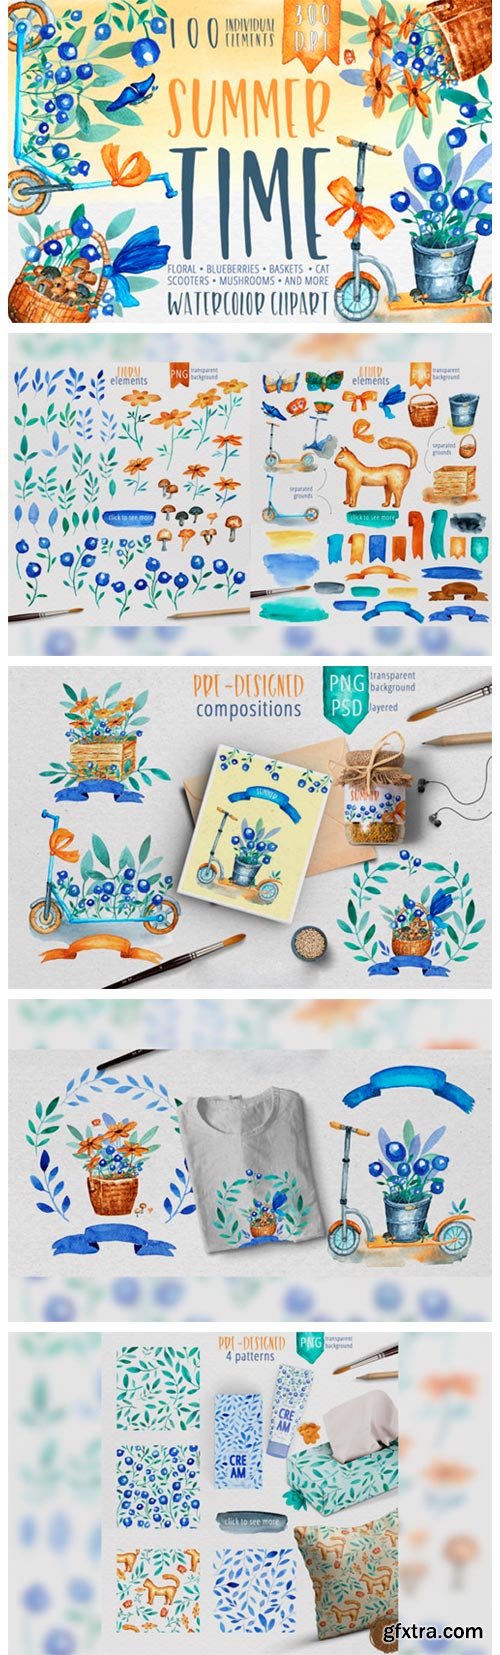 Summer Time - Watercolor Clipart 4147721